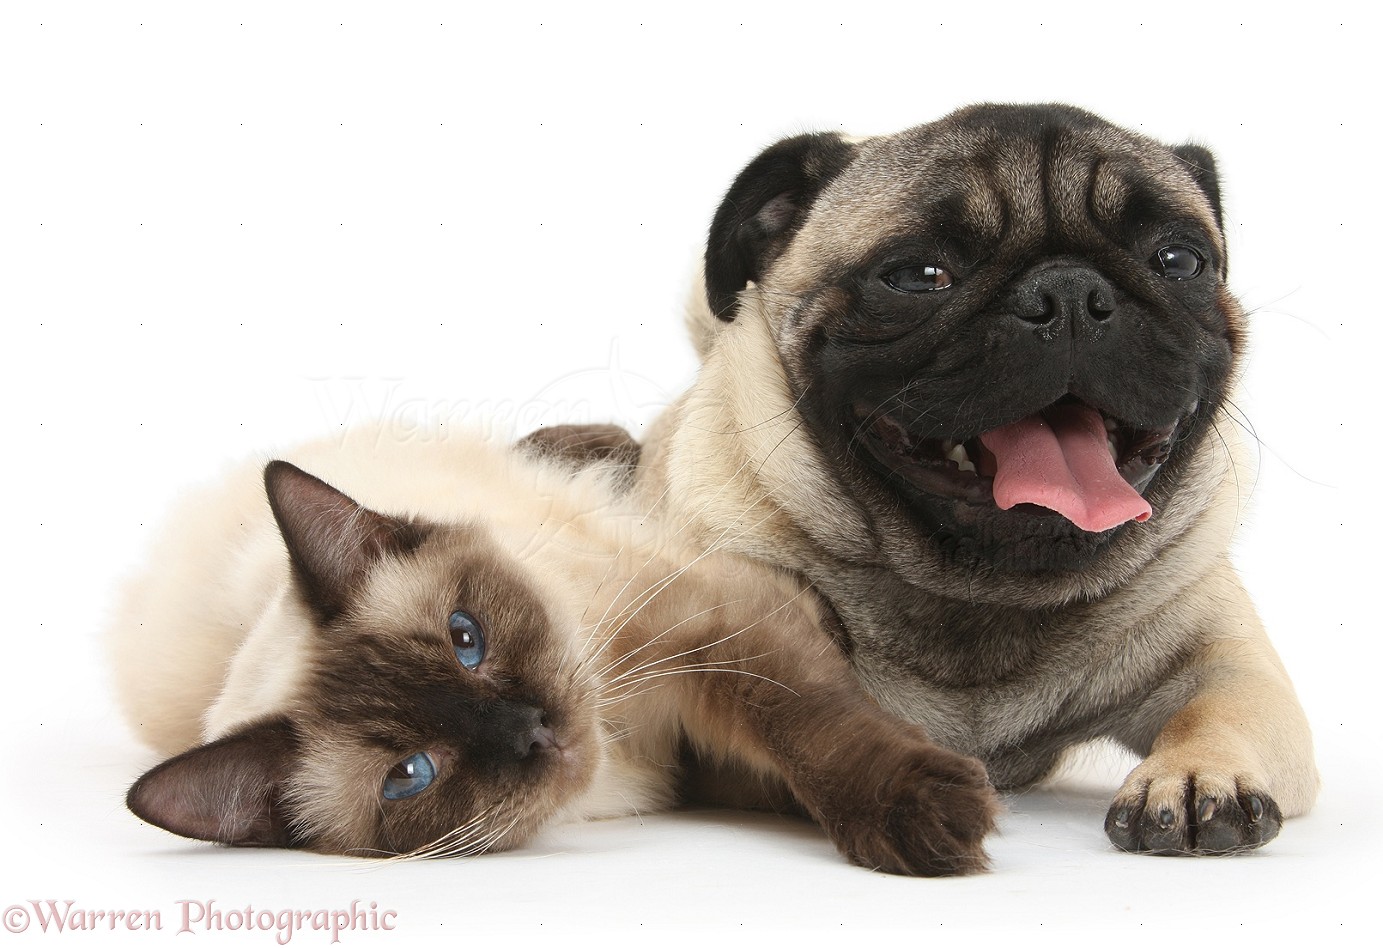 Cat And Dog Image Crazy Gallery